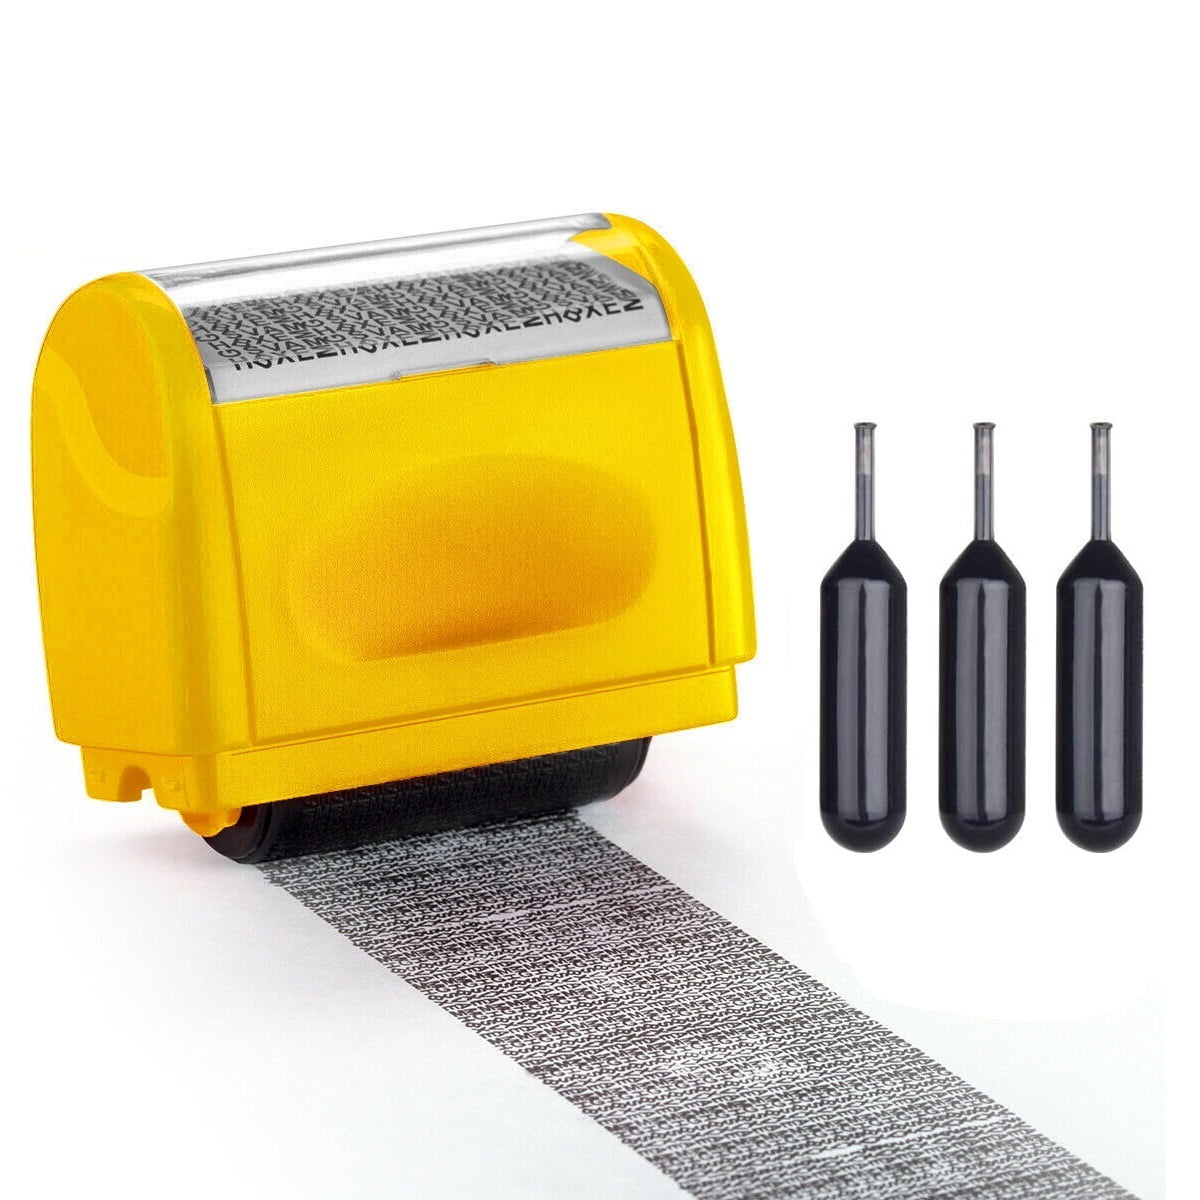 Private & Confidential Stamp Roller for Personal Information Blackout MoKo Identity Theft Protection Stamp Roller Large Size Refillable Self Inking Wide Roller Security Stamp Yellow